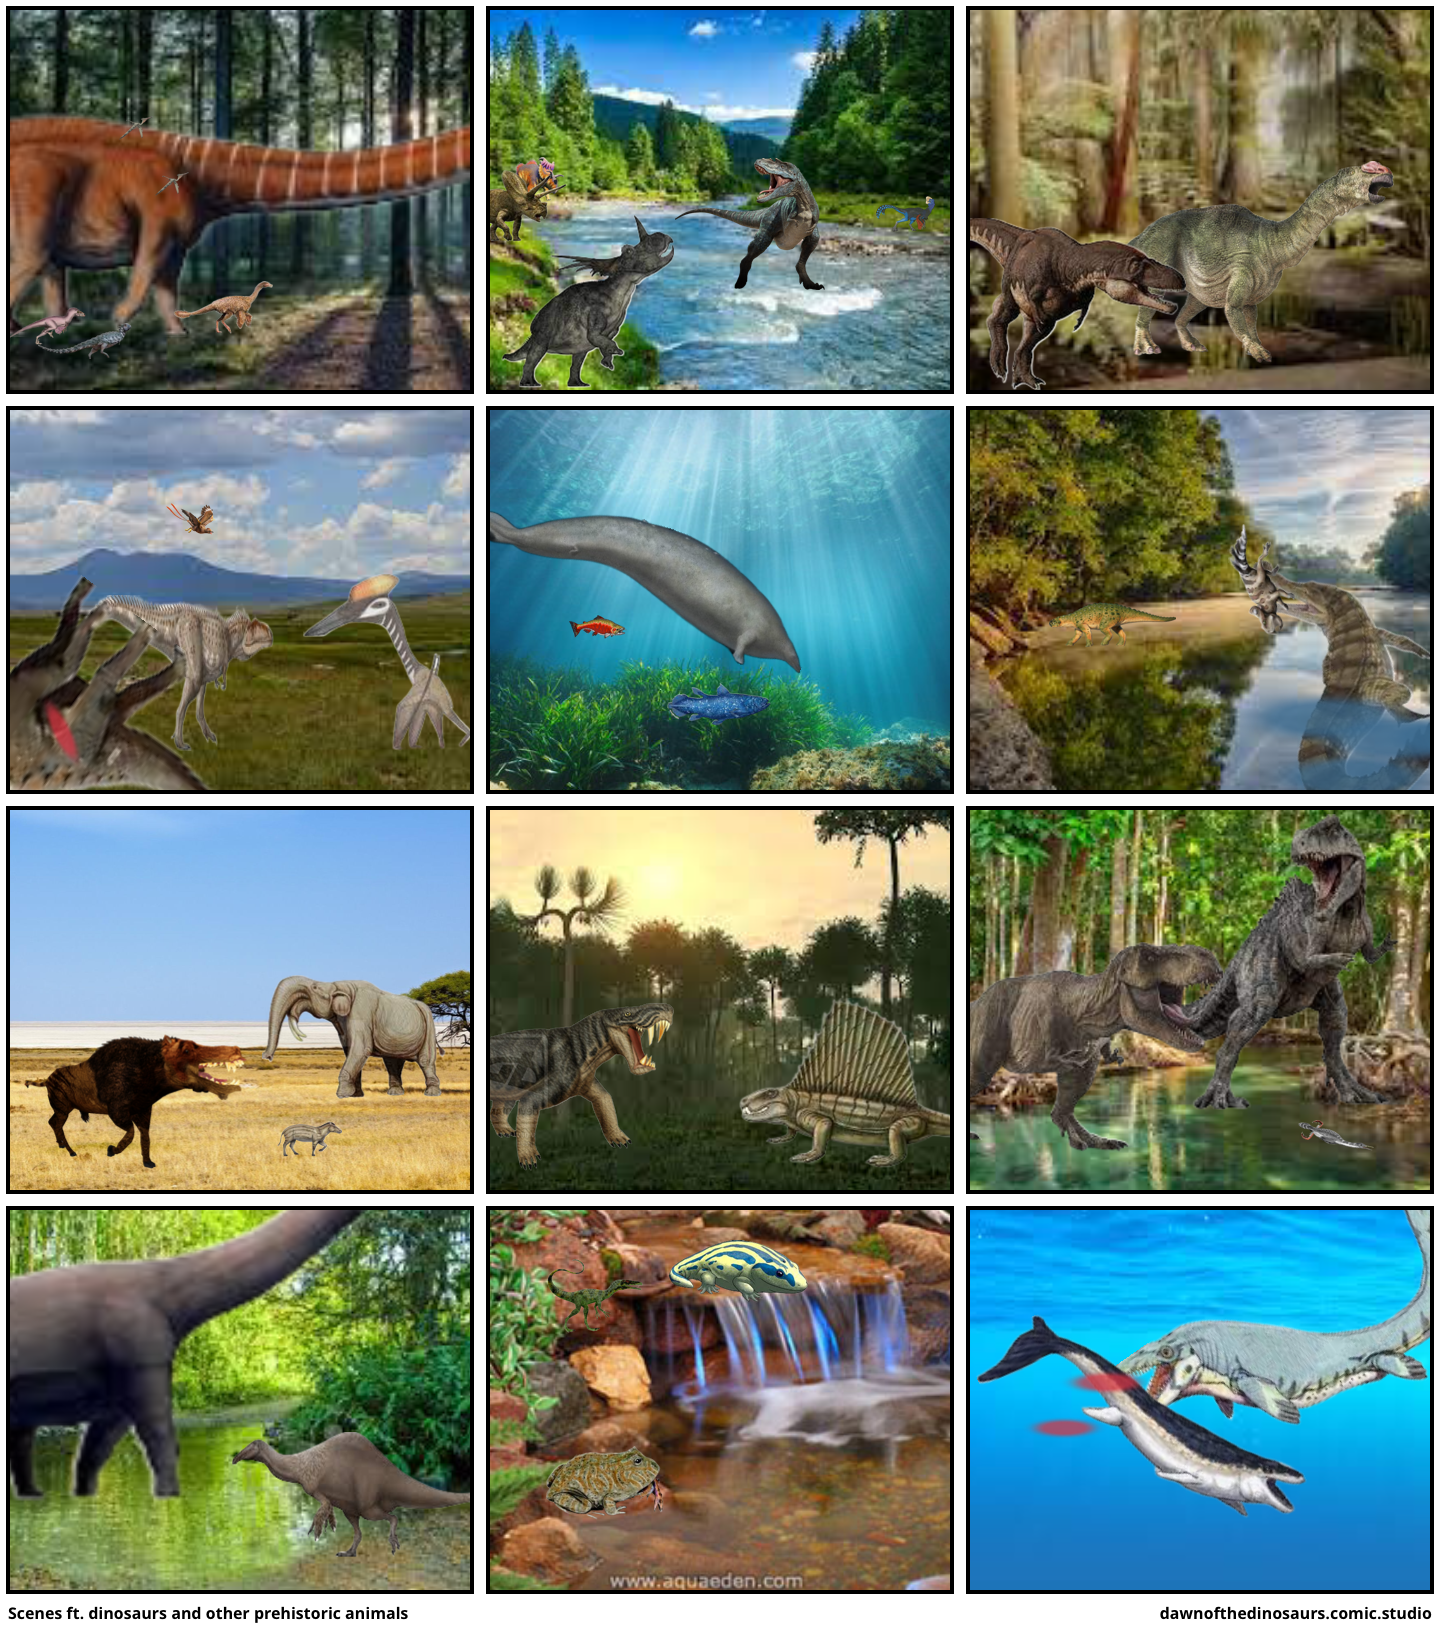 Scenes ft. dinosaurs and other prehistoric animals